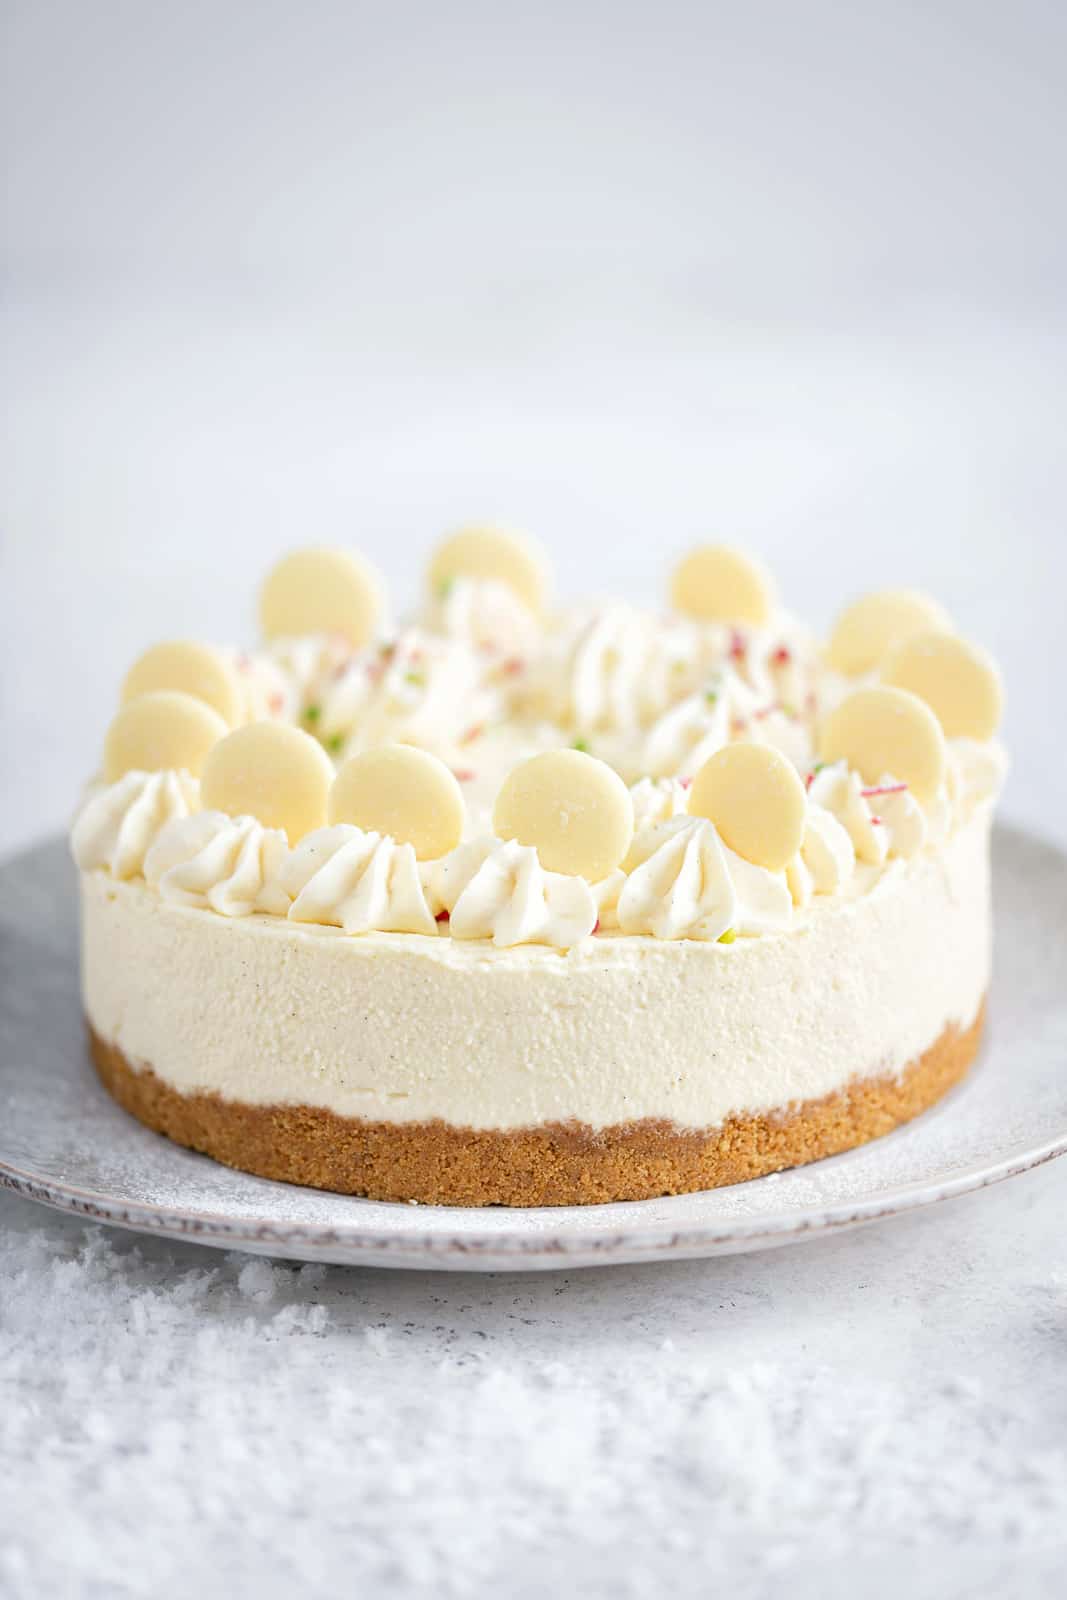 White chocolate cheesecake with piped cream and white chocolate buttons